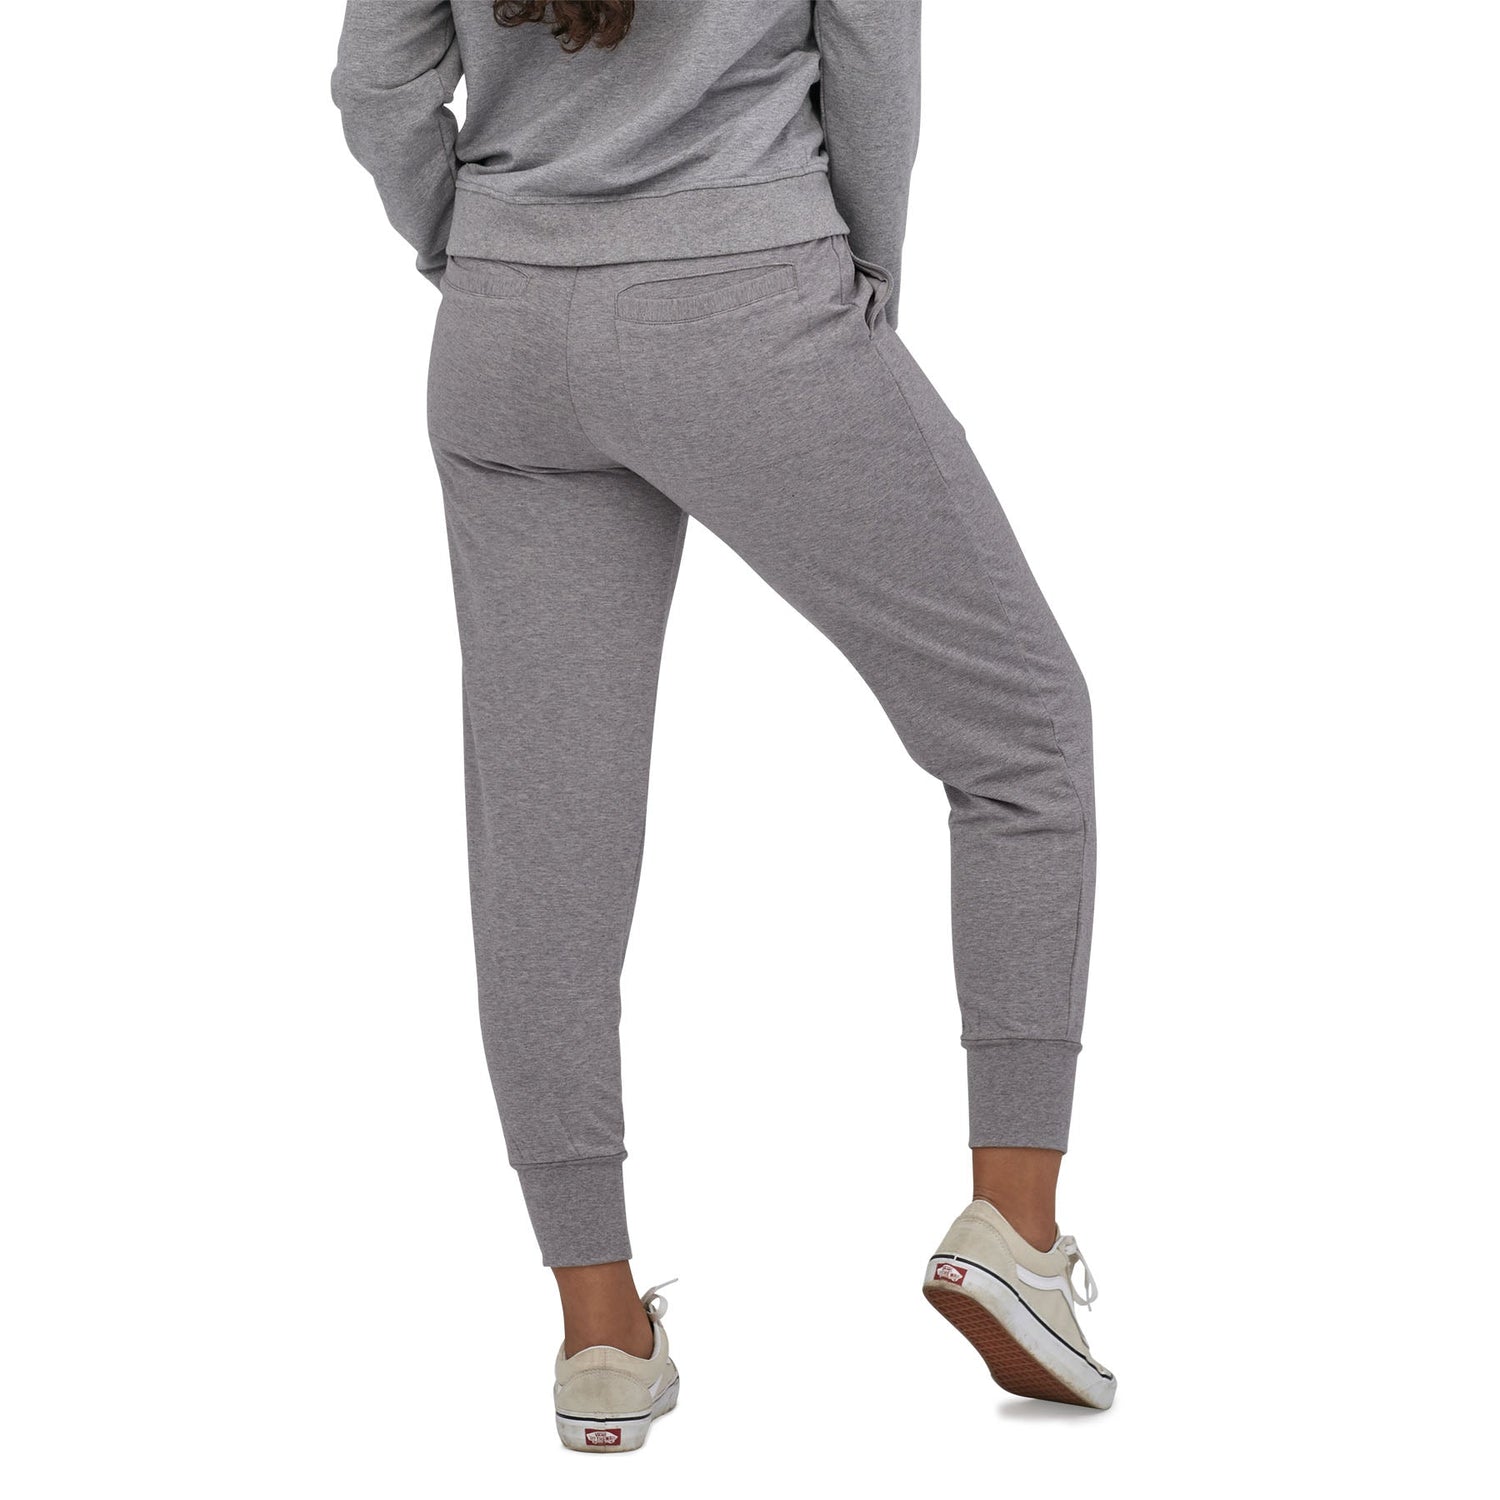 Patagonia - W's Ahnya Pants - Organic Cotton & Recycled Polyester - Weekendbee - sustainable sportswear